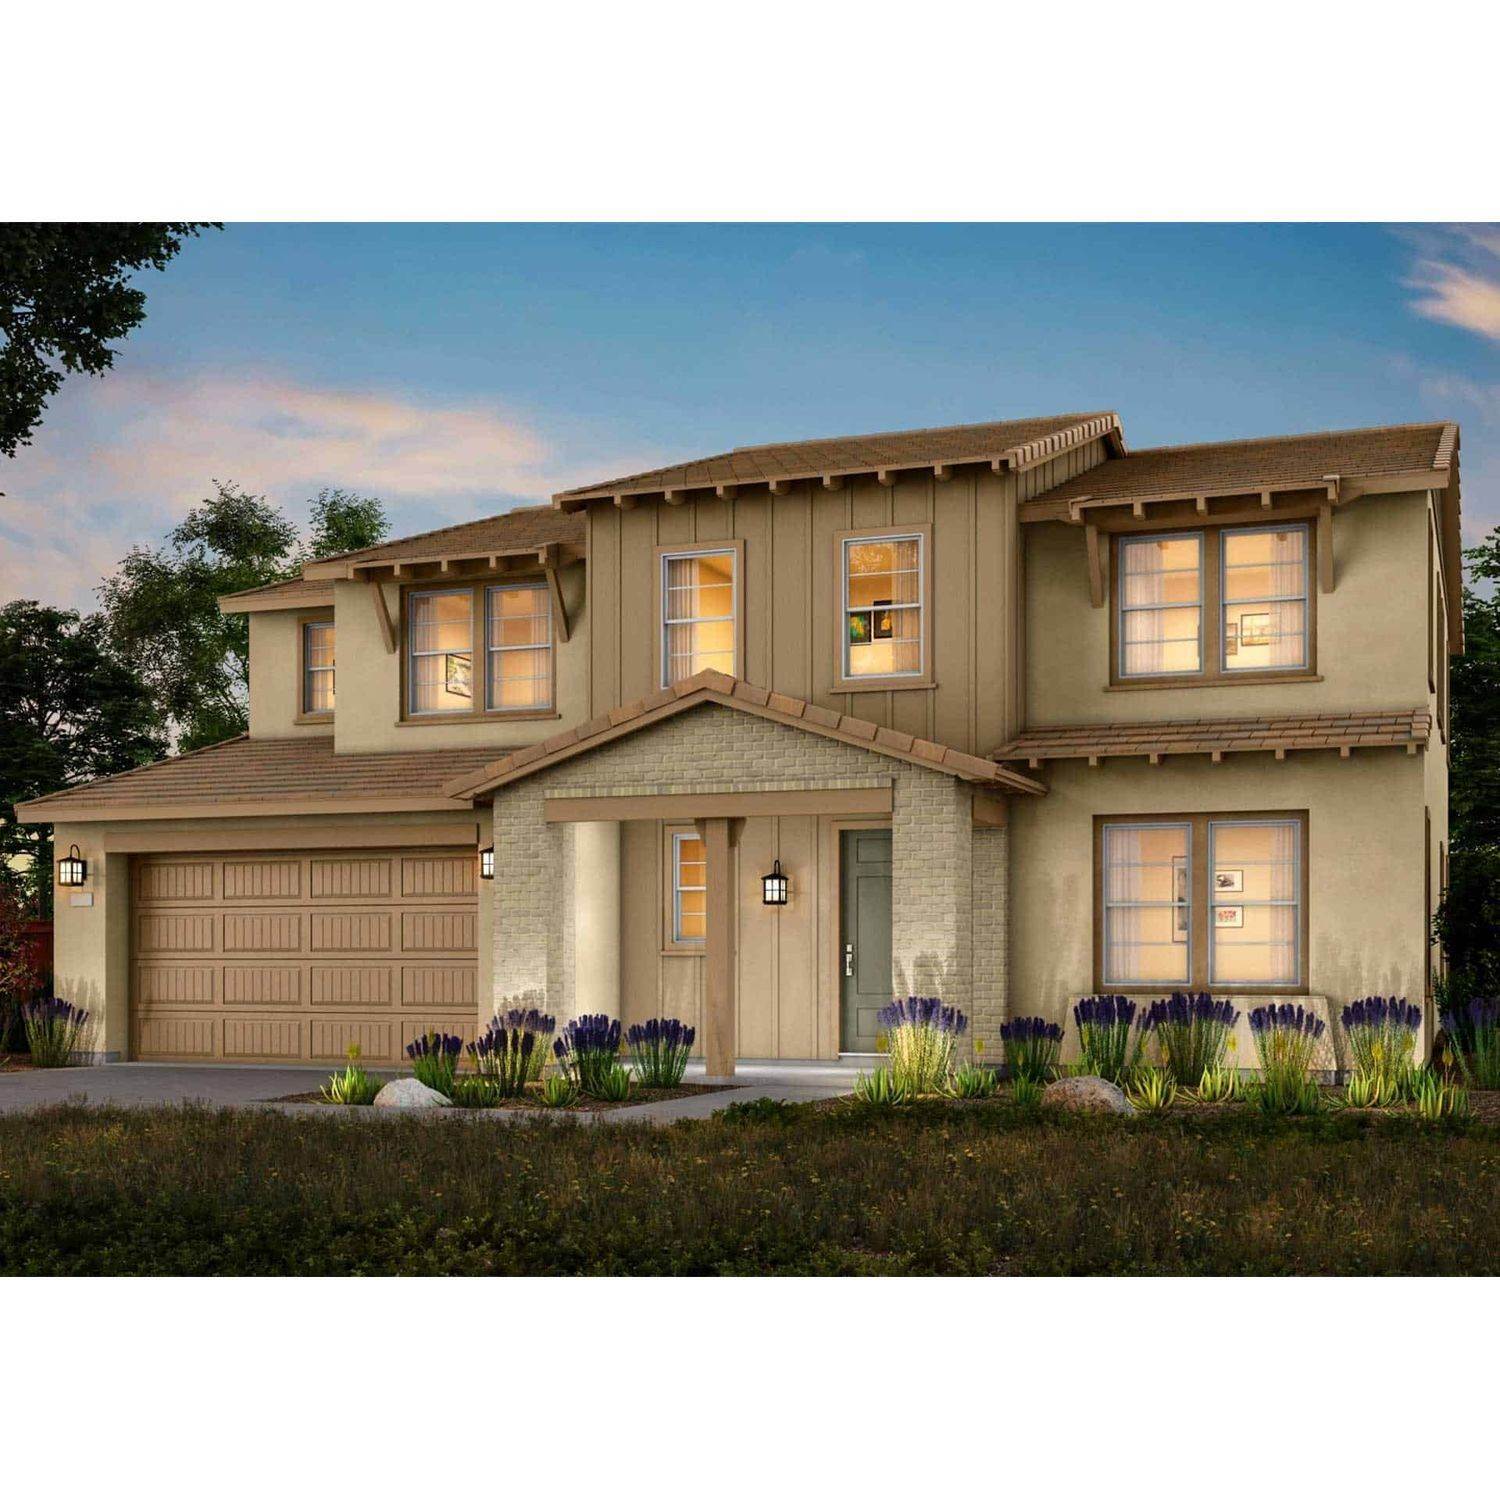 3. The Cove at River Islands building at 2799 Orion Court, Lathrop, CA 95330